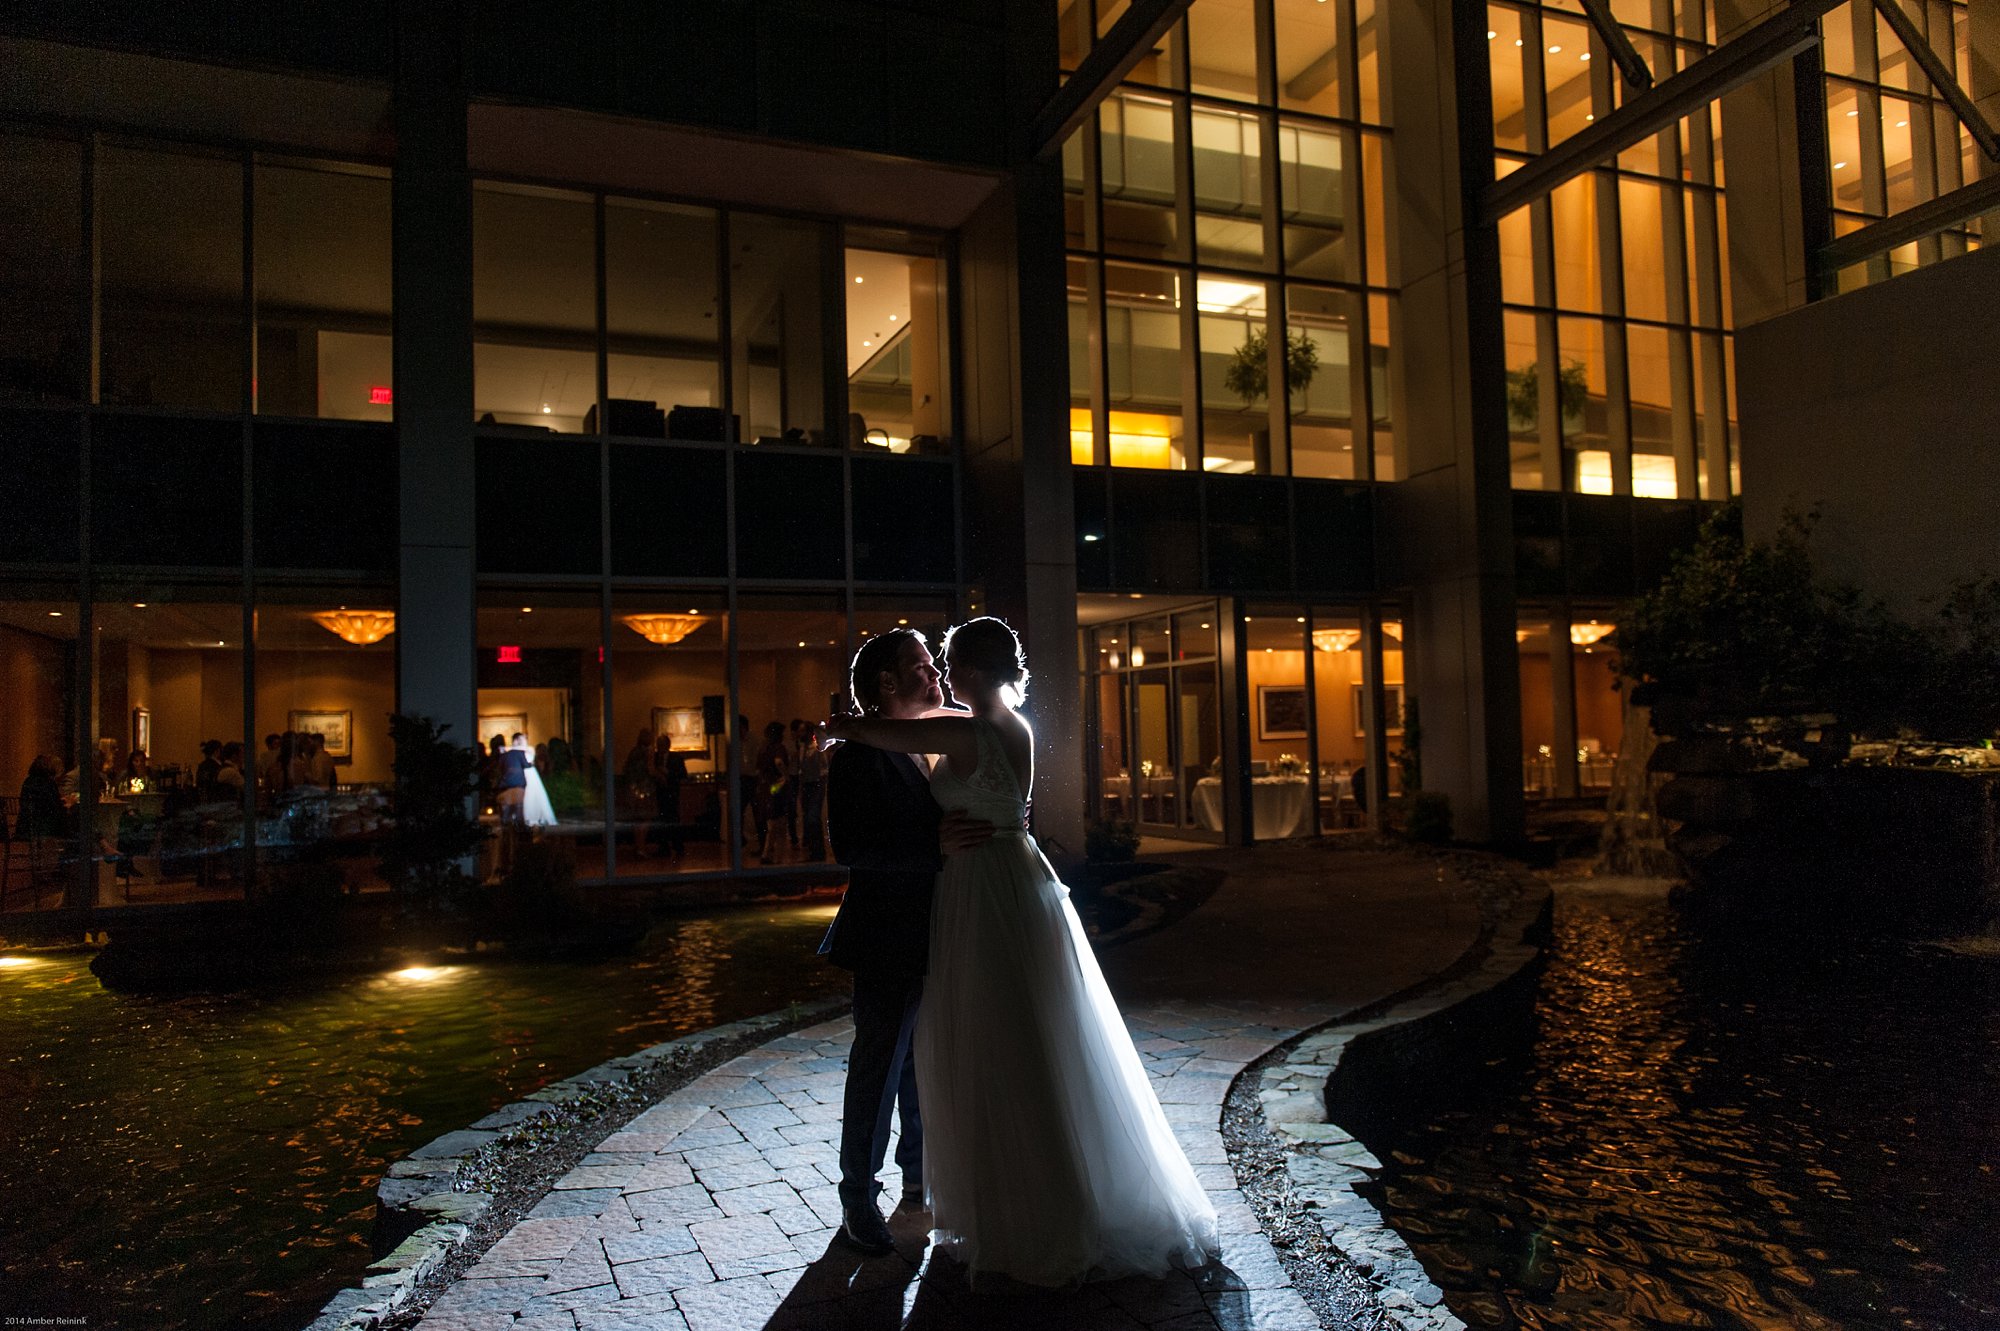 Night time silhouette portrait of bride and groom at 2941 Vienna Virginia wedding